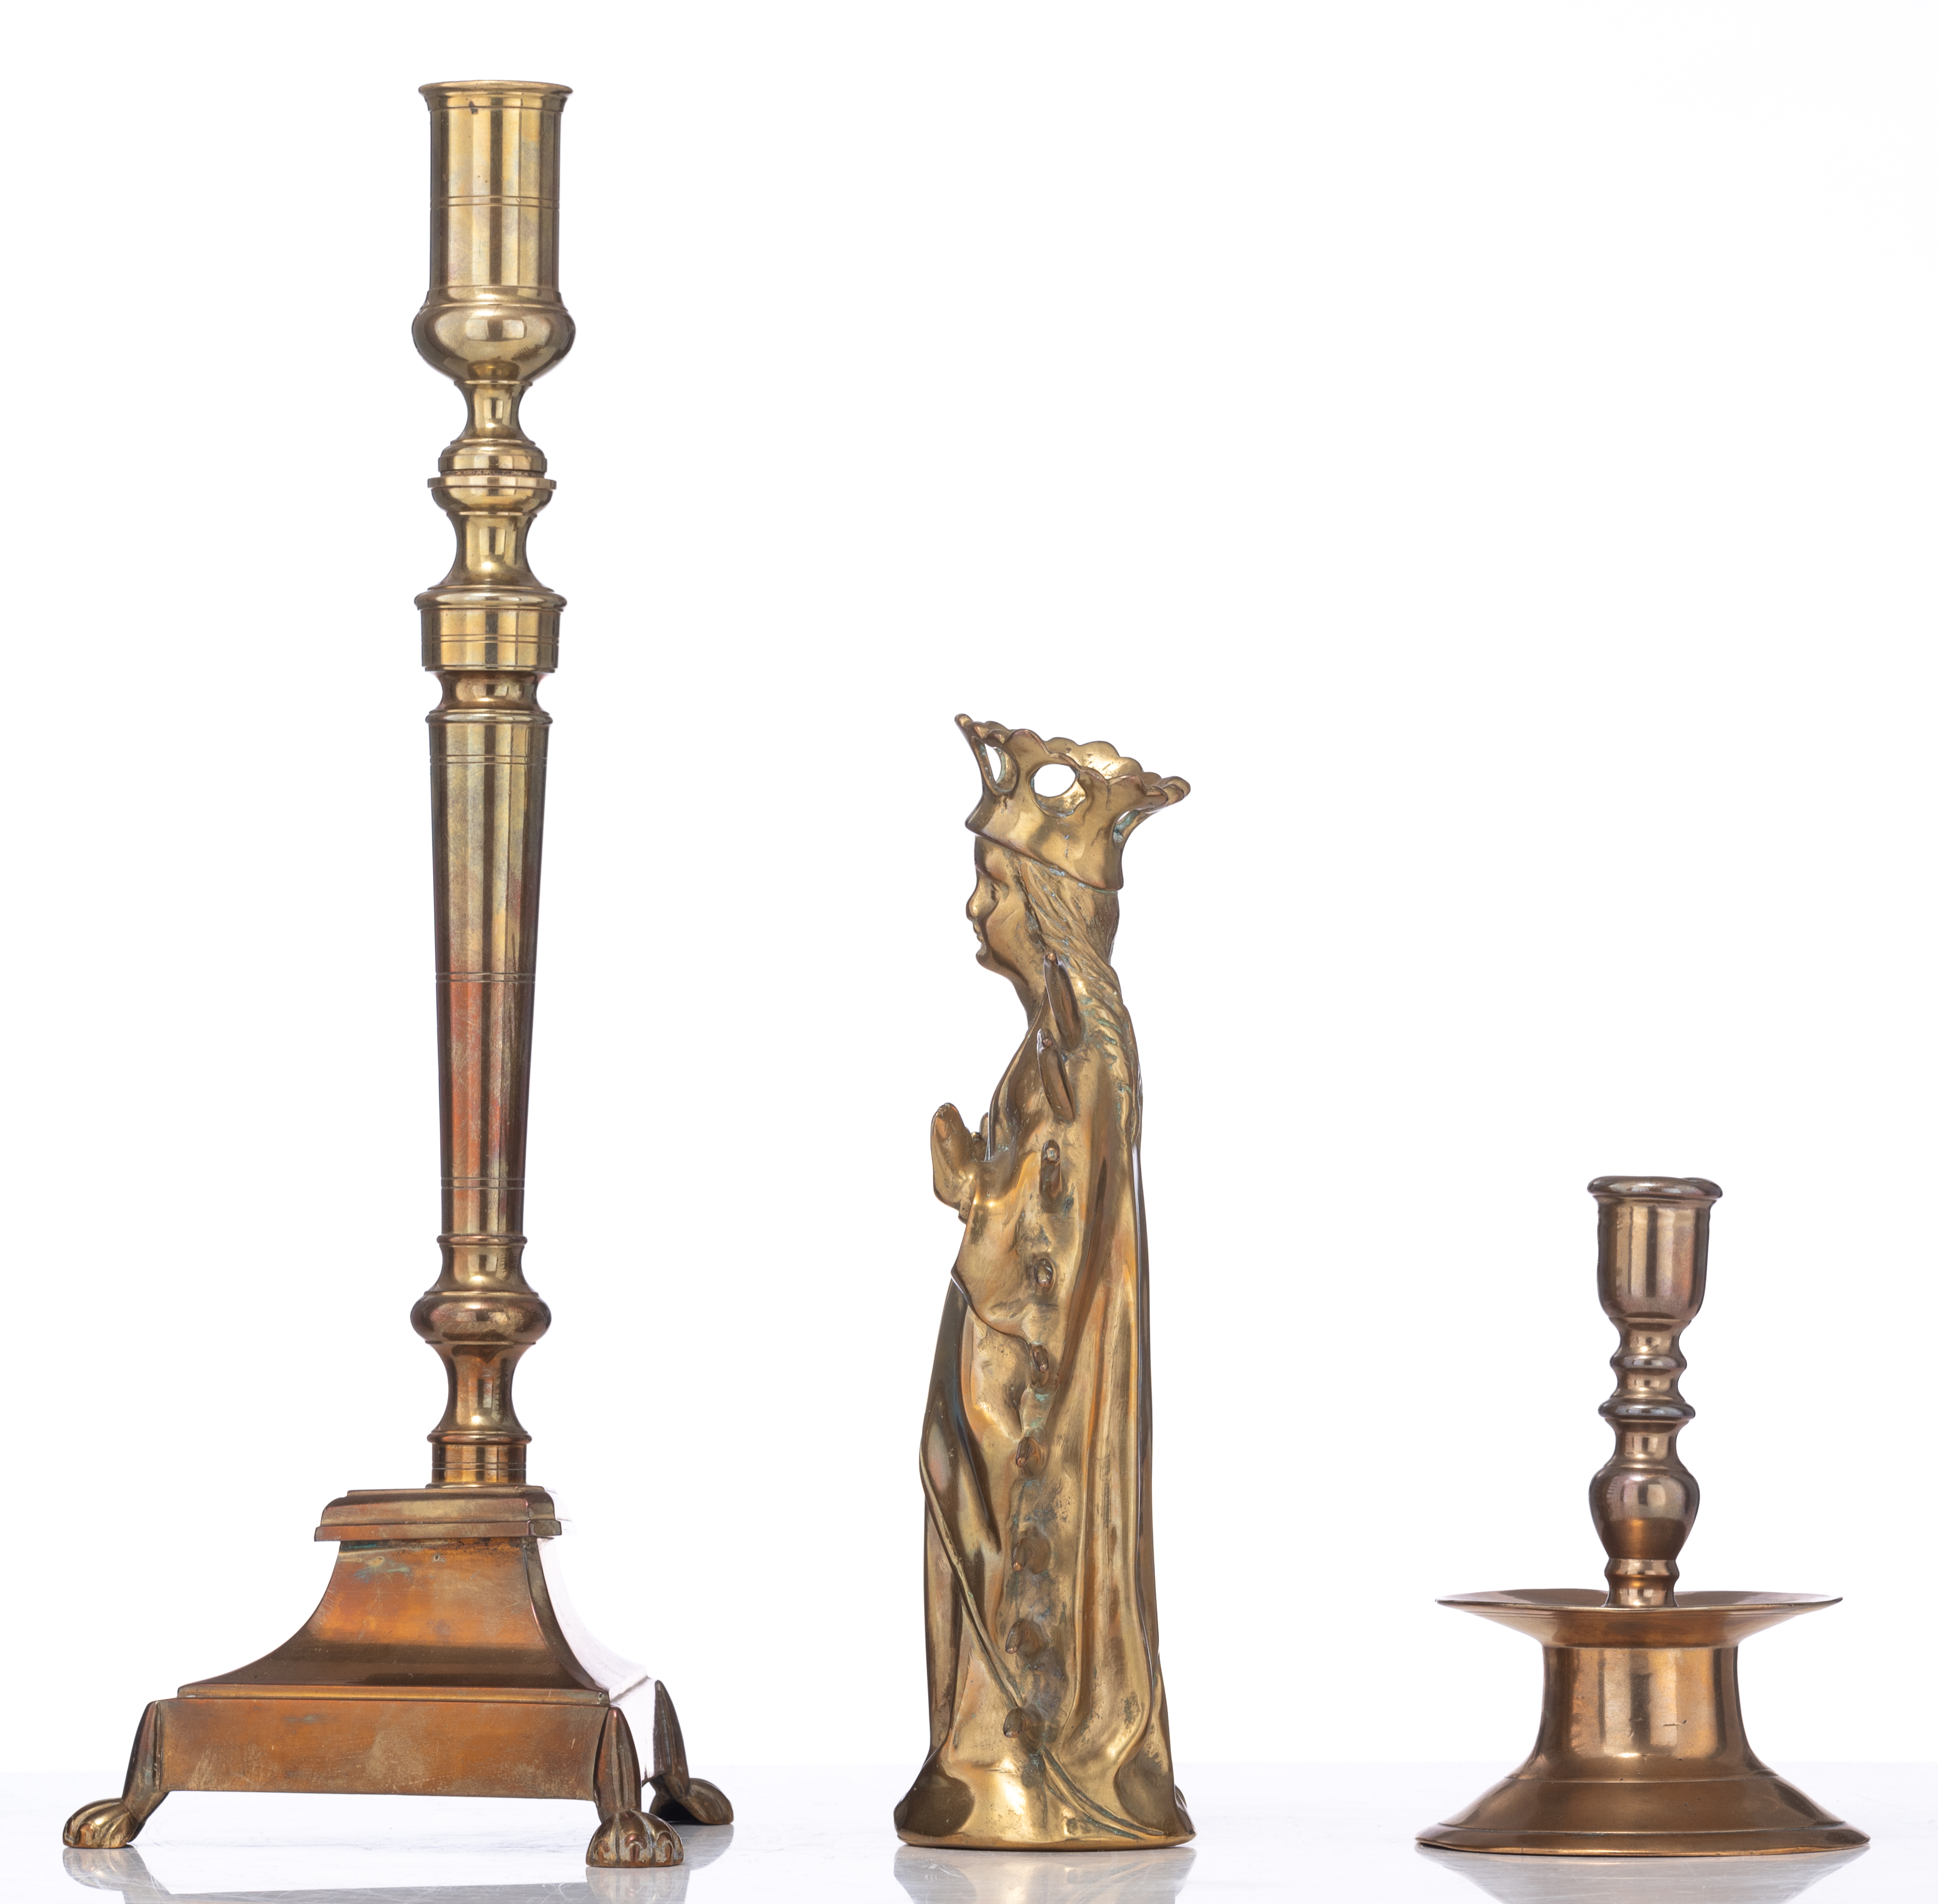 A 17thC Low Countries copper alloy candlestick, H 15,5 cm; added a bronze rayed Virgin of the Immacu - Image 2 of 6